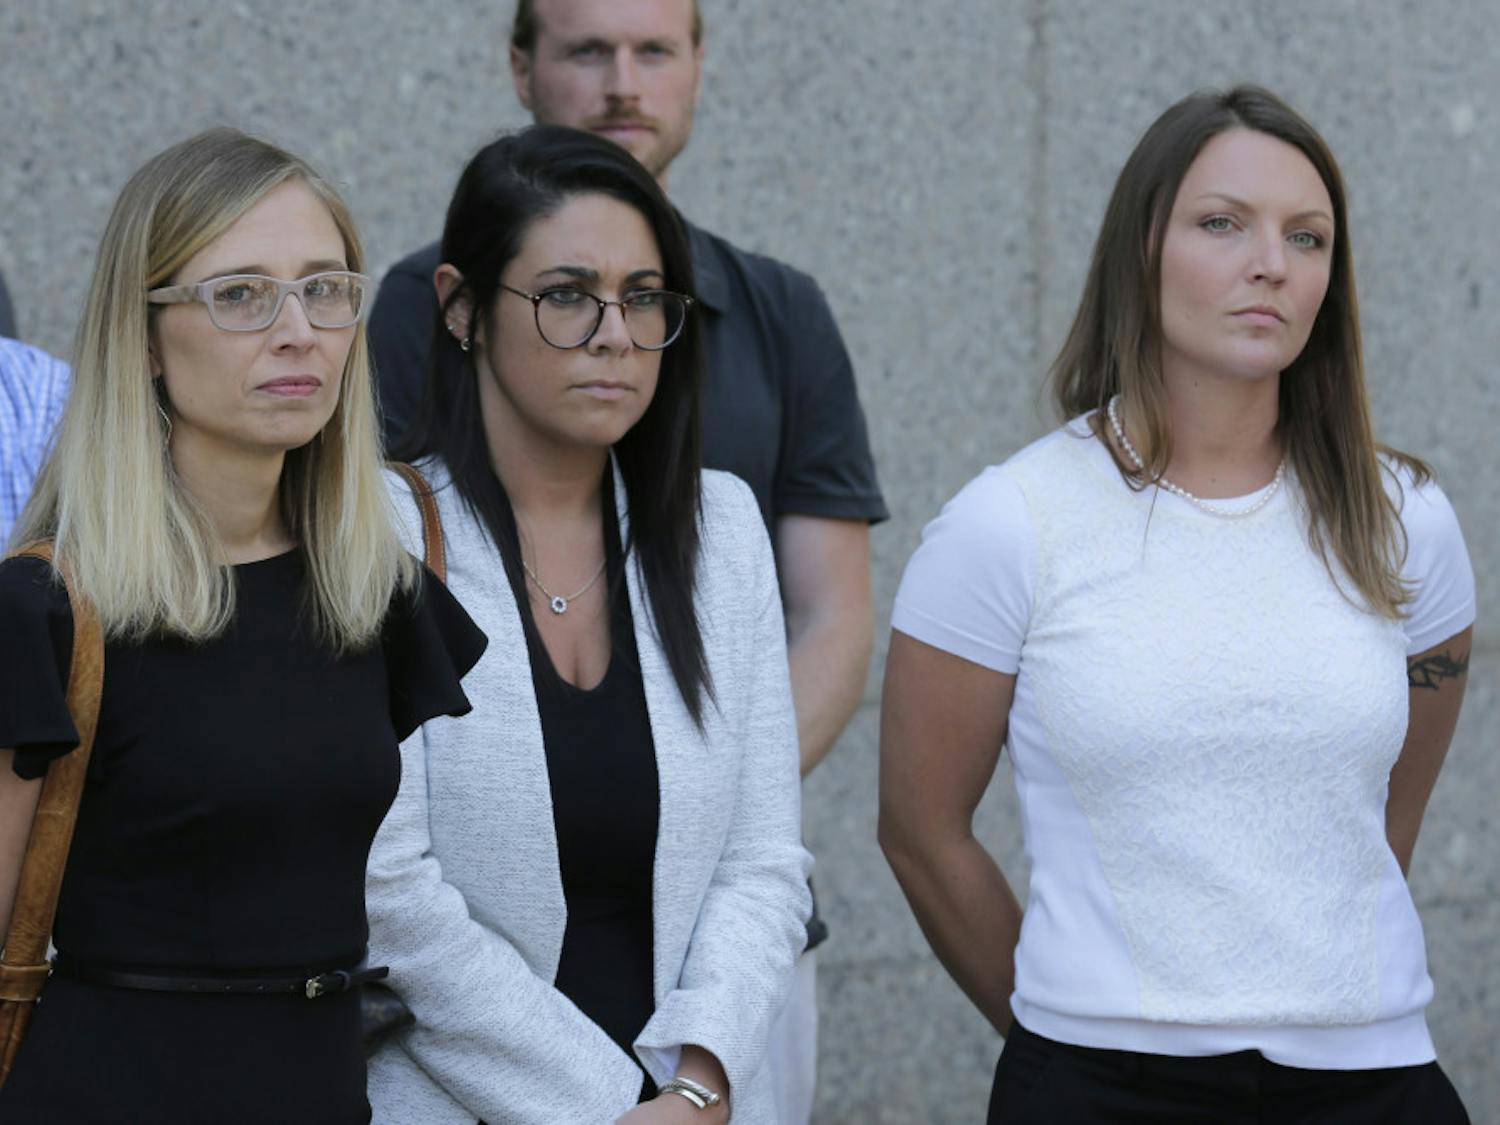 Annie Farmer, left, and Courtney Wild, right, accusers of Jeffery Epstein, stand outside the courthouse in New York, Monday, July 15, 2019. Financier Jeffrey Epstein will remain behind bars for now as a federal judge mulls whether to grant bail on charges he sexually abused underage girls.